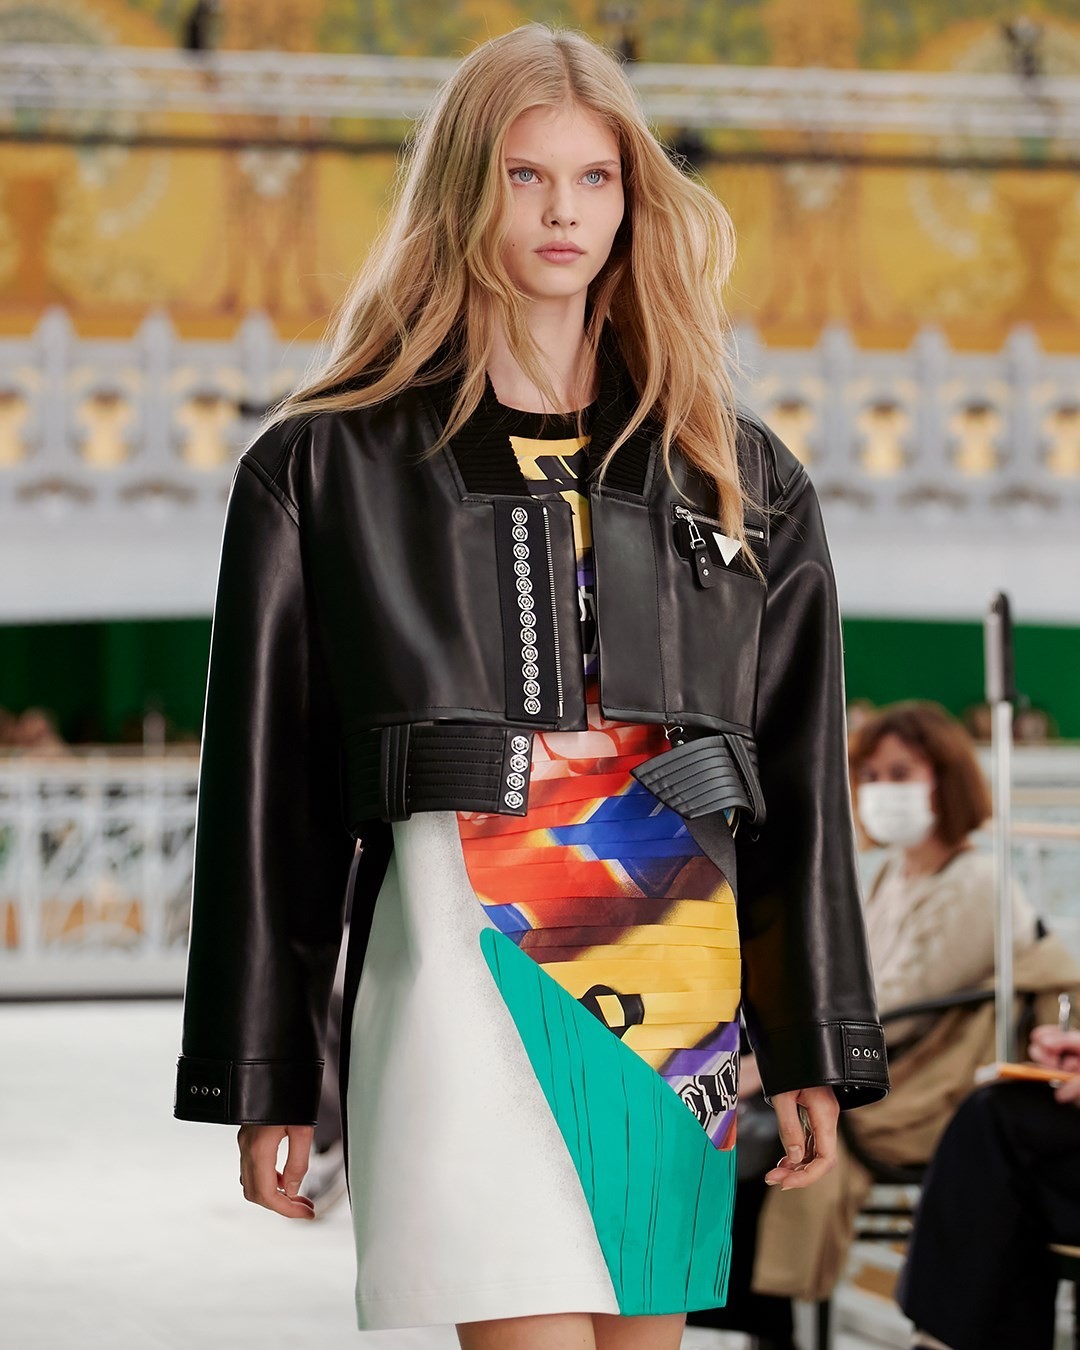 Louis Vuitton - #LVSS21
Twisting familiar silhouettes. Closeup of a look from @NicolasGhesquiere’s latest #LouisVuitton Collection. Watch the Show at louisvuitton.com